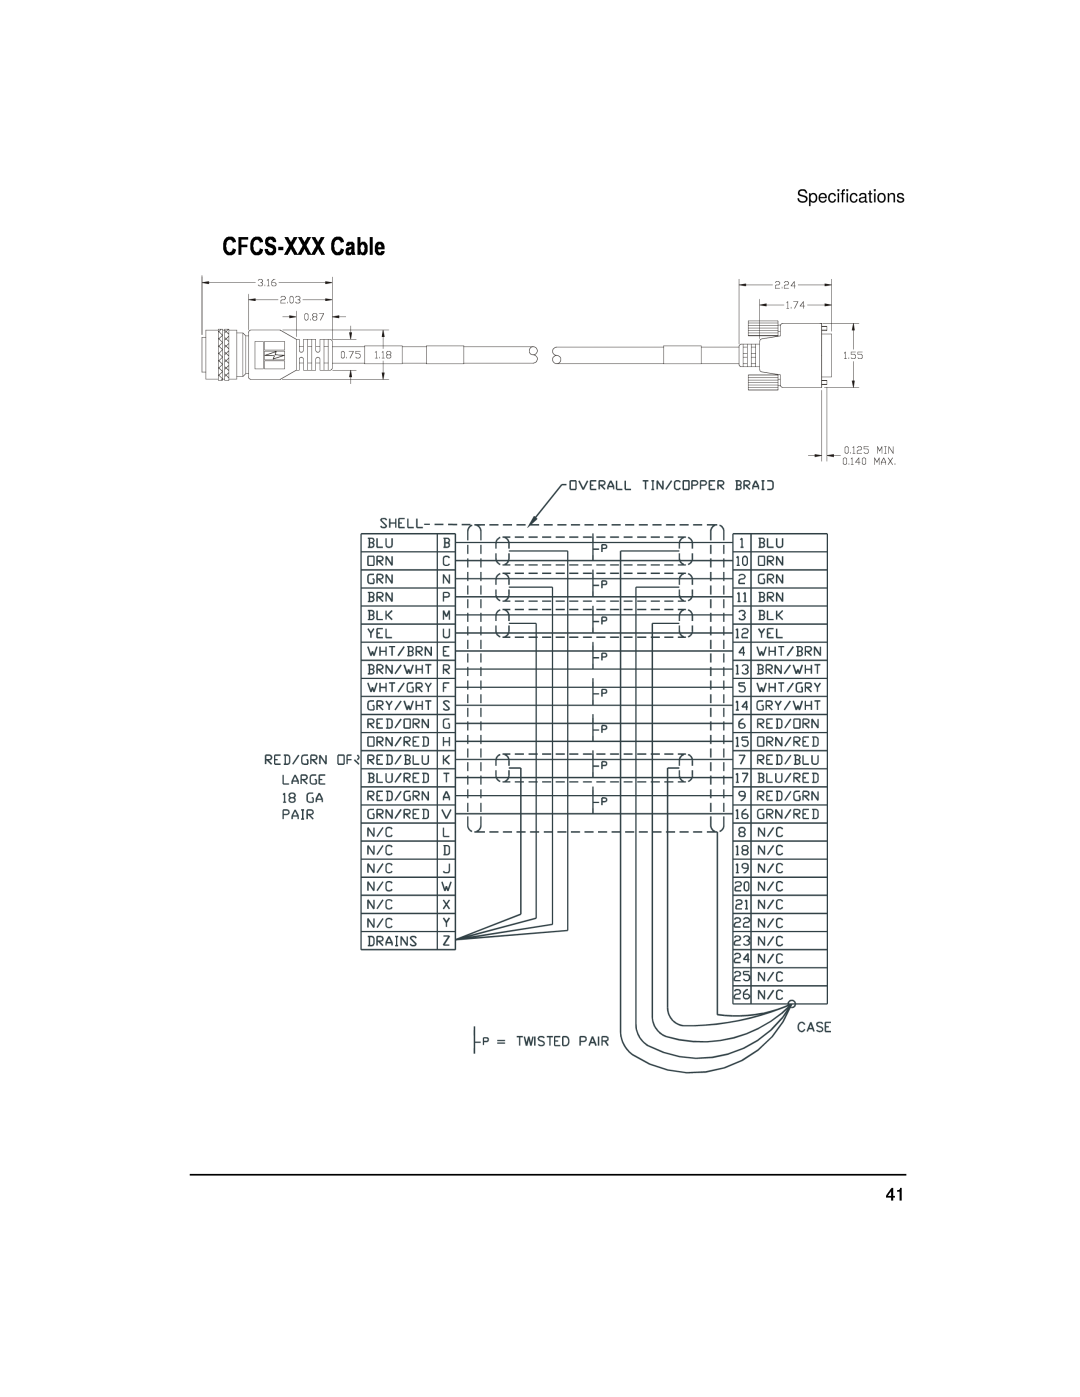 Emerson 400508-02 installation manual CFCS-XXX Cable, Specifications 